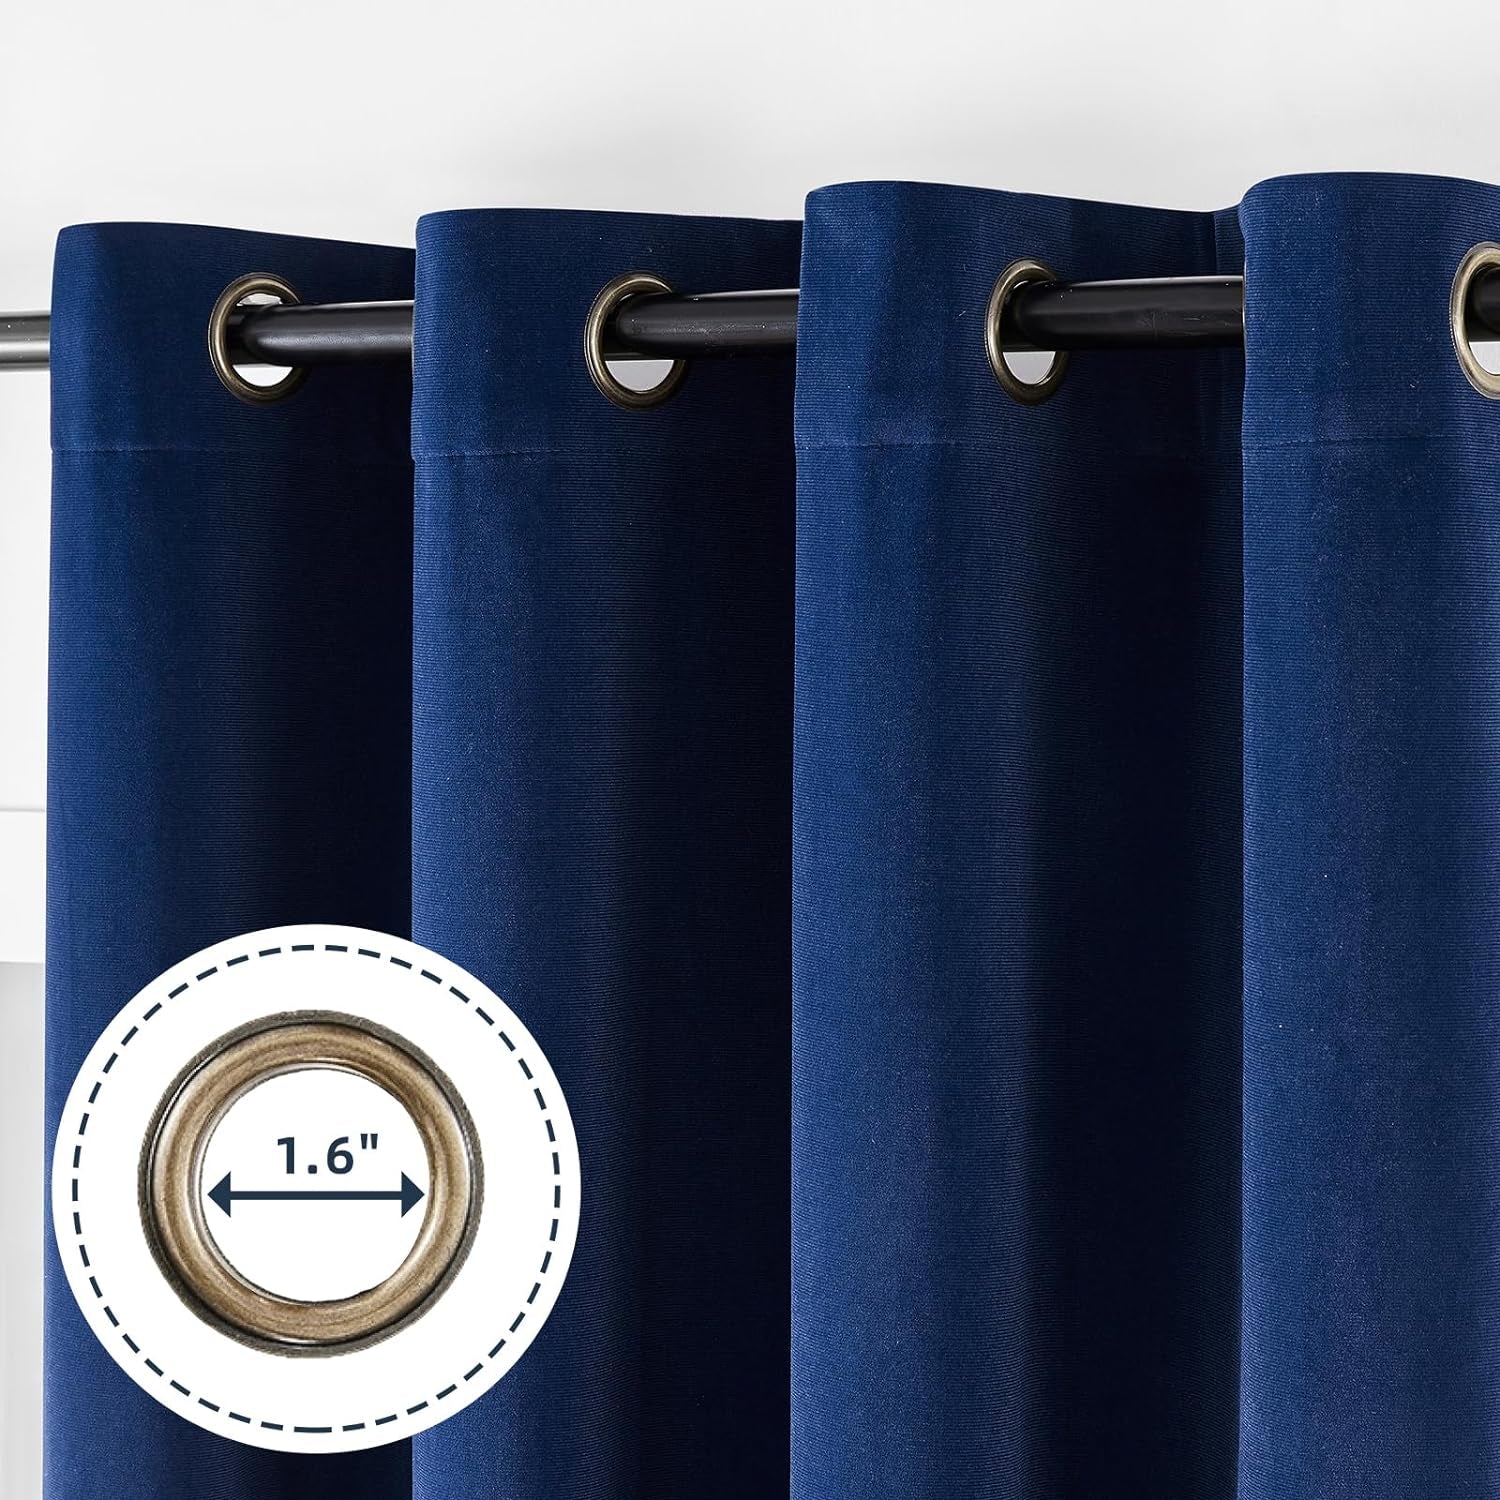 Joydeco Navy Blue 100% Blackout Curtains 90 Inch Curtains 2 Panels Set, Black Out Curtain for Bedroom, Grommet Heavy Luxury Thermal Insulated Velvet Curtains for Living Room Home Theater, 52W X 90L  Joydeco   